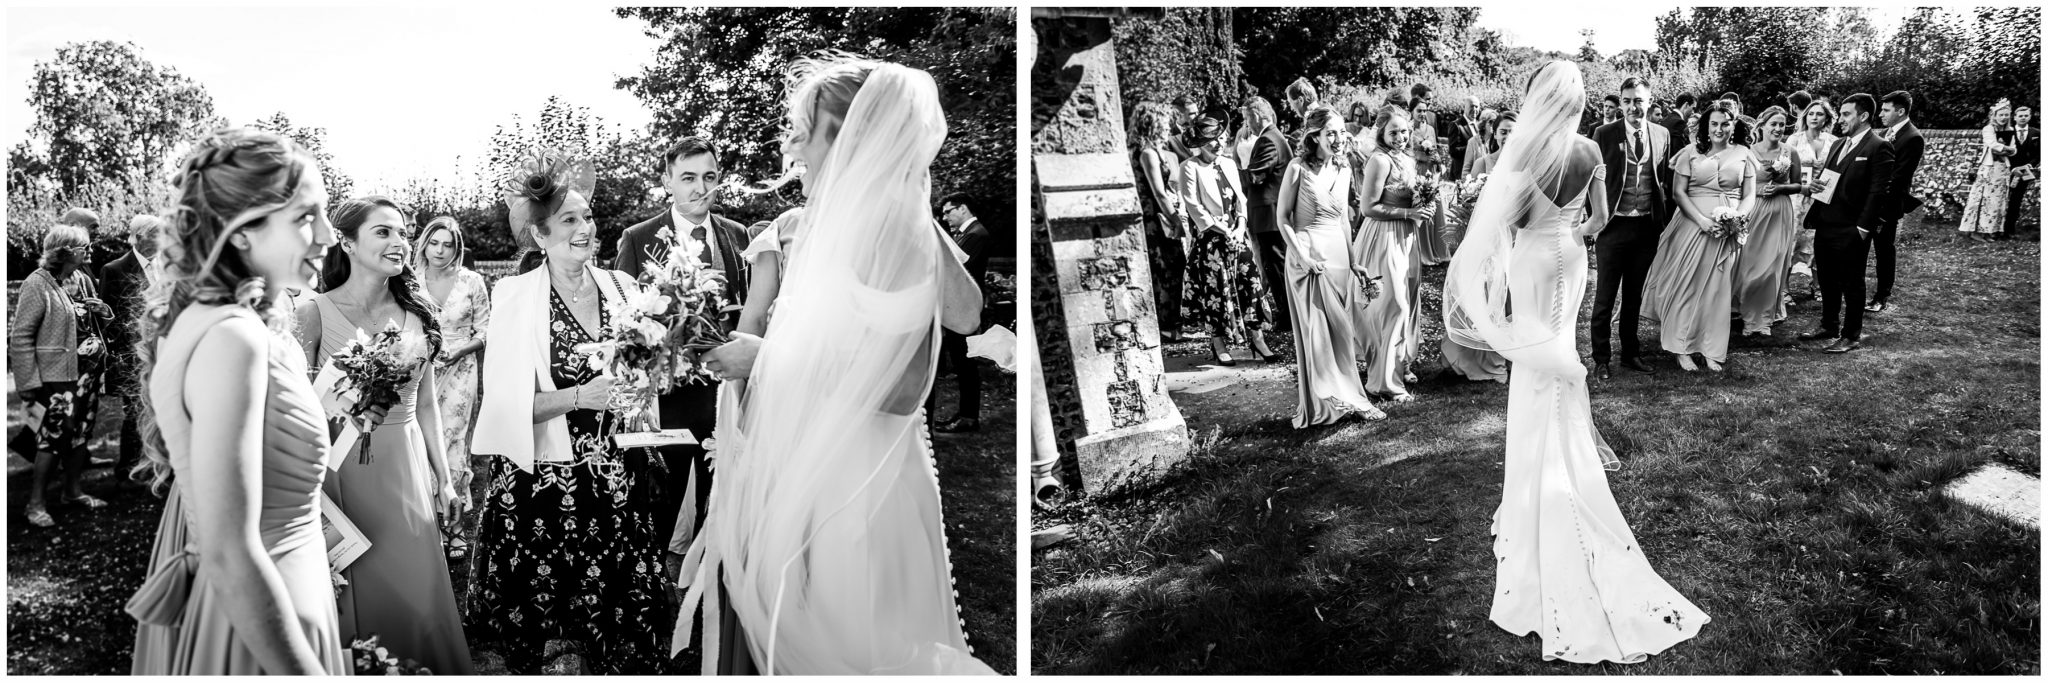 Canid black and white photographs of bride in the church grounds with wedding guests after the ceremony